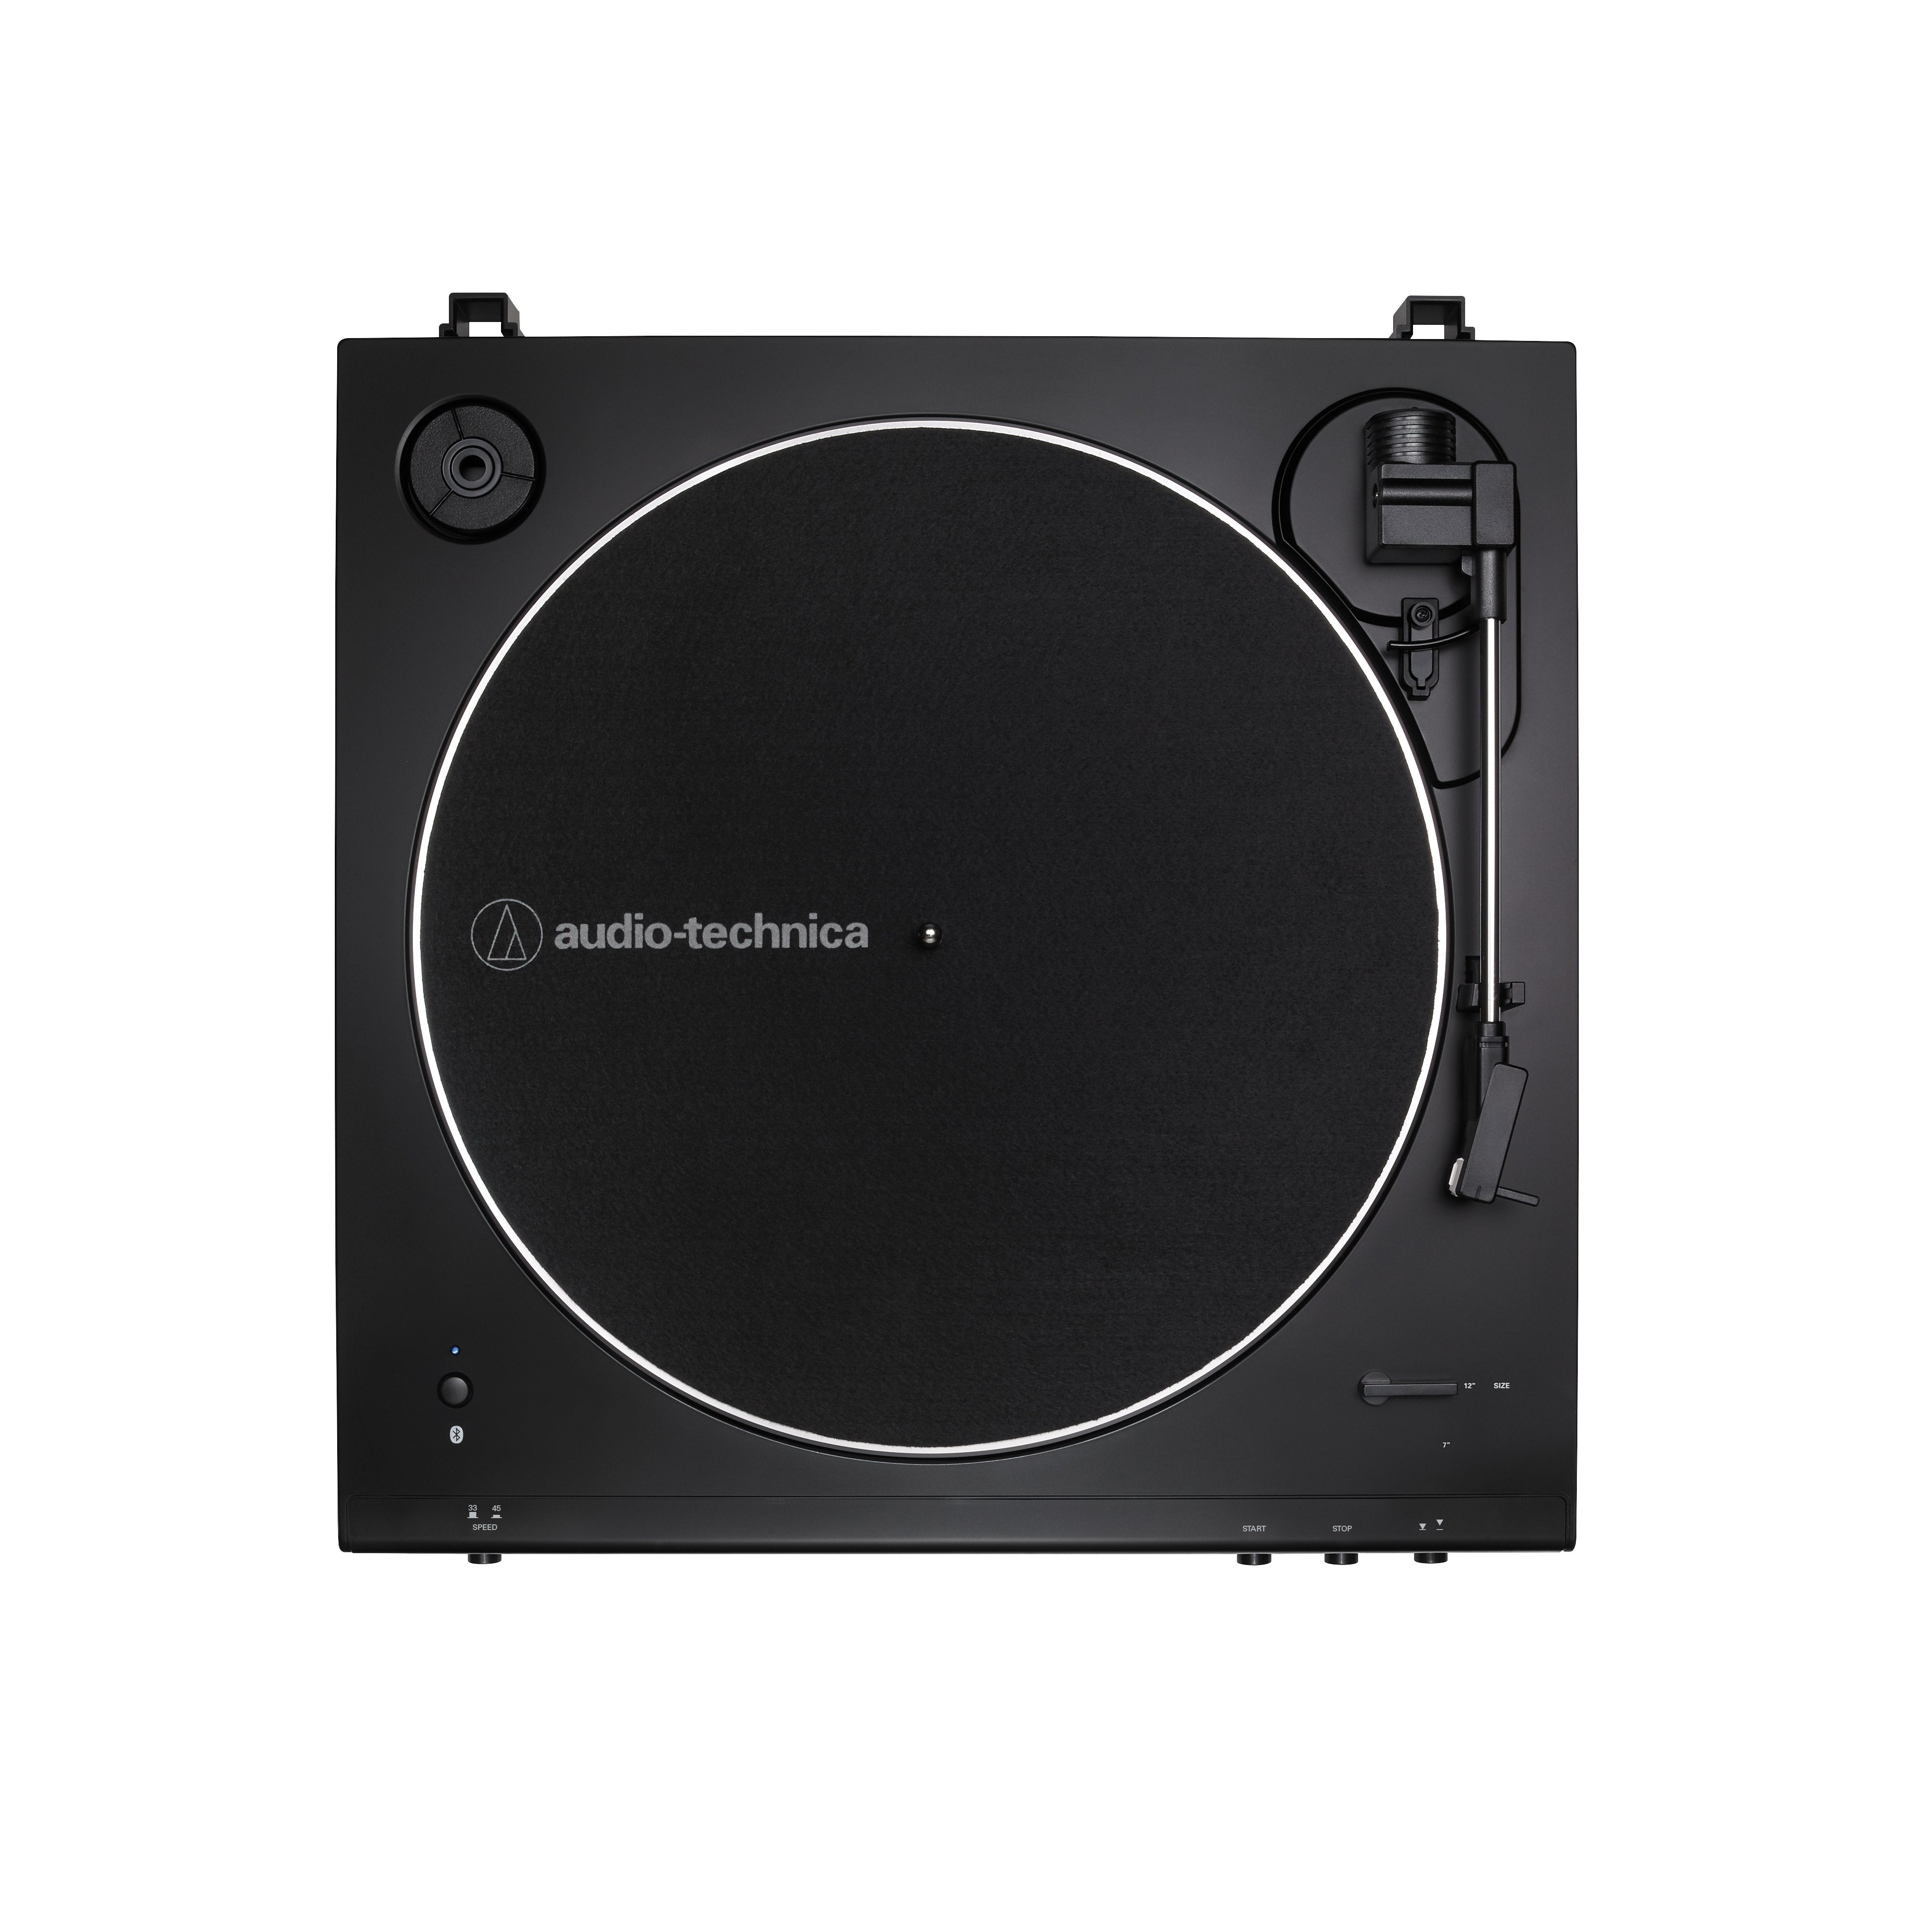 Audio Technica: AT-LP60XBT-WH Automatic Bluetooth Turntable - White / Black